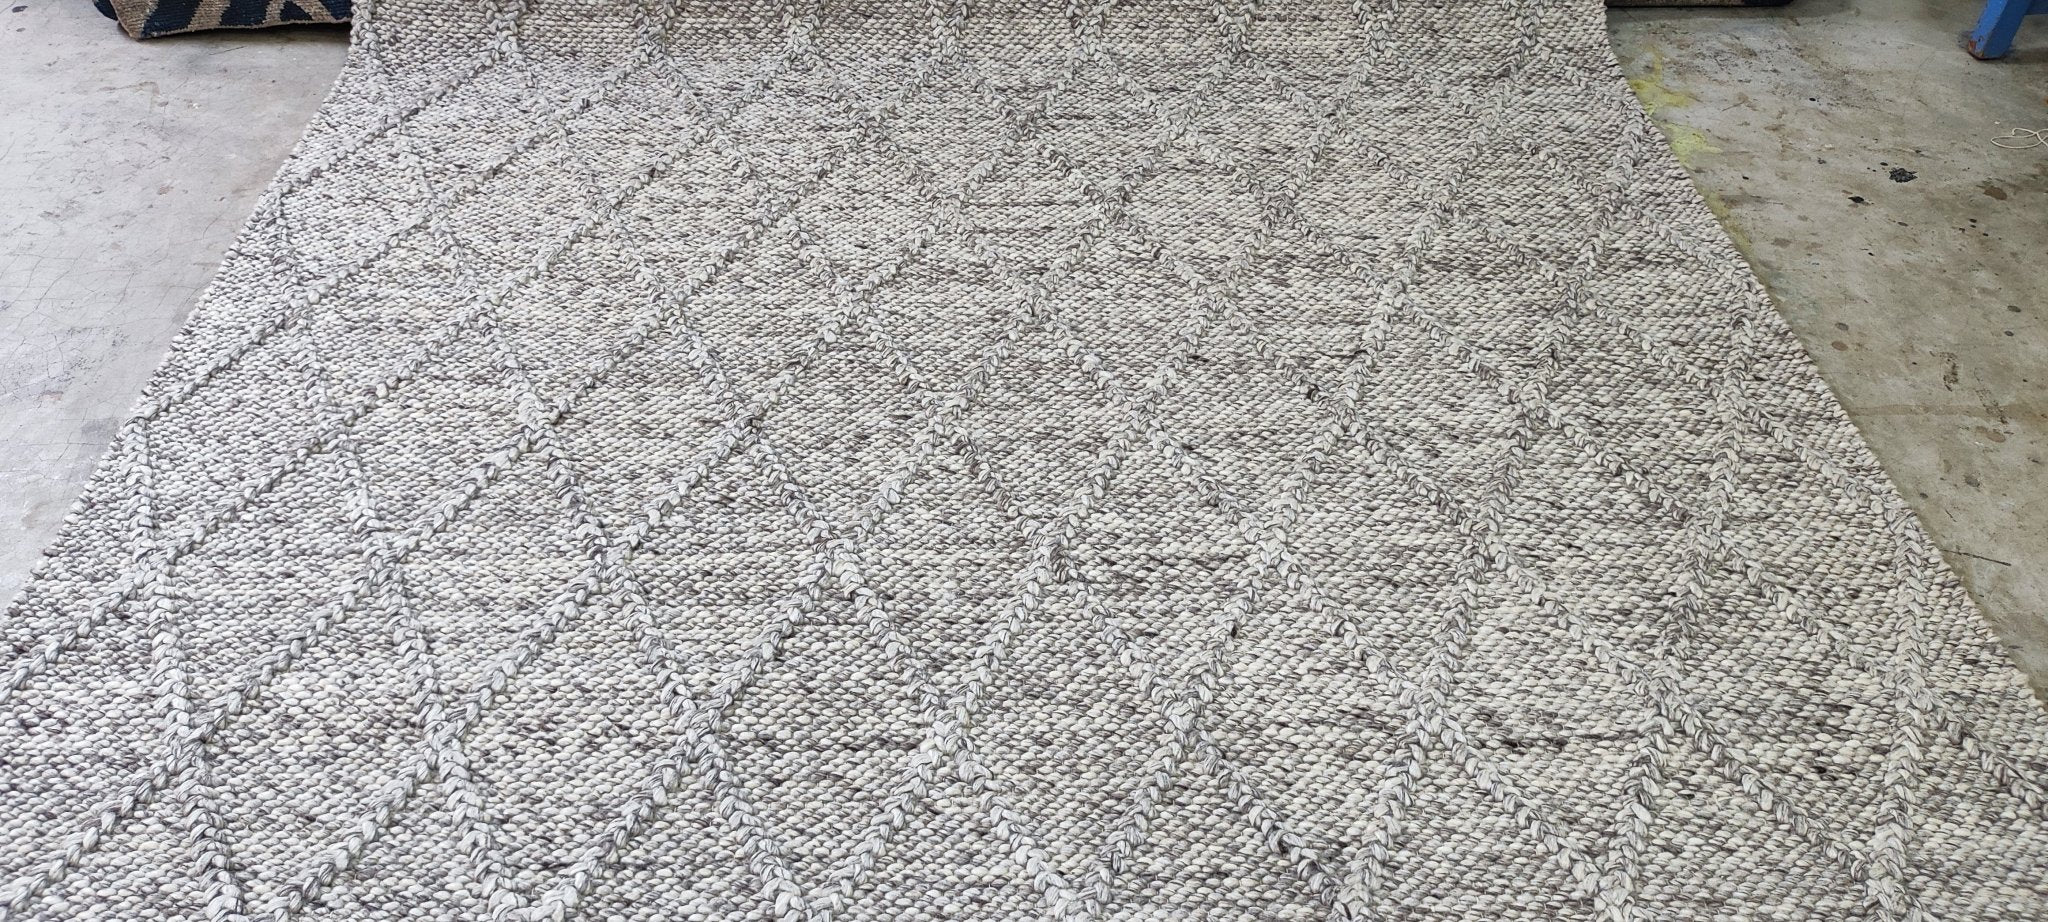 Gerri 6.6x9.3 Handwoven Wool Durrie Natural/Grey Geometrical | Banana Manor Rug Factory Outlet